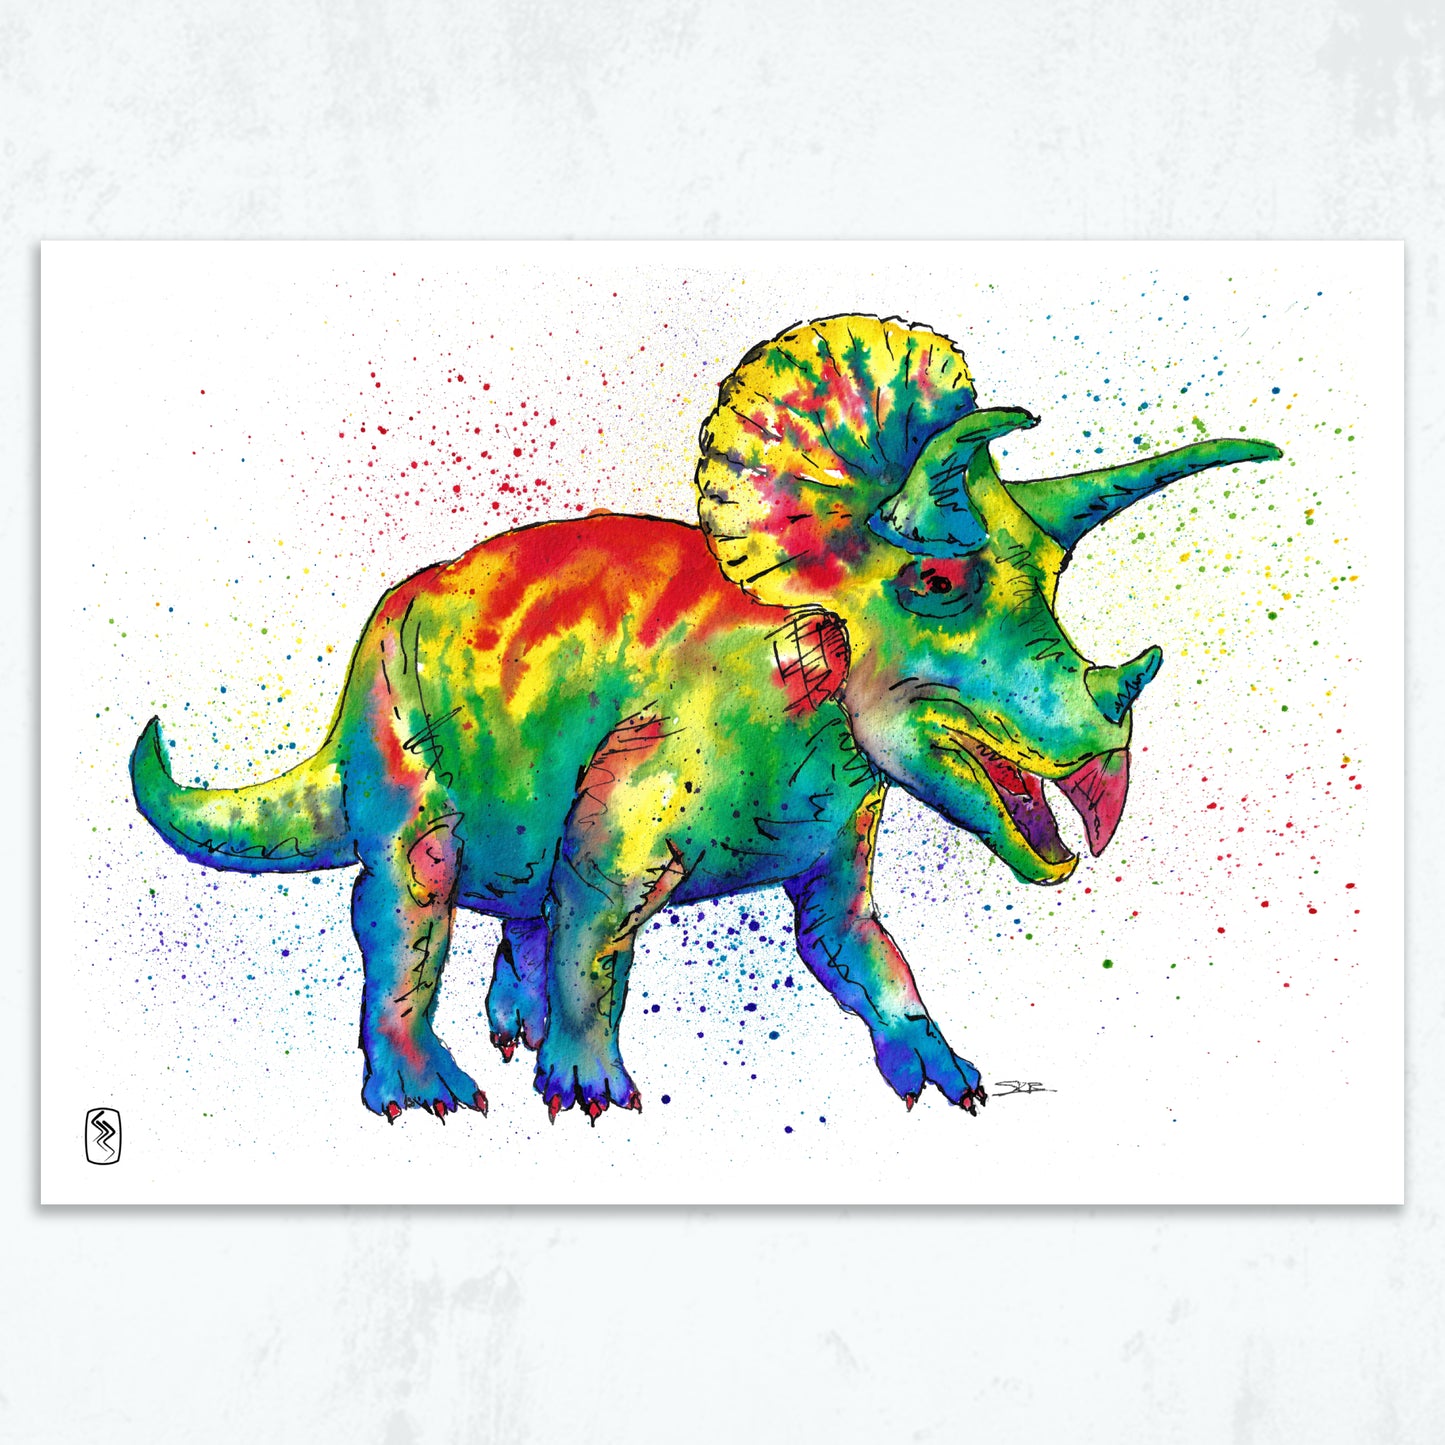 Triceratops Print - A5 / A4 / A3